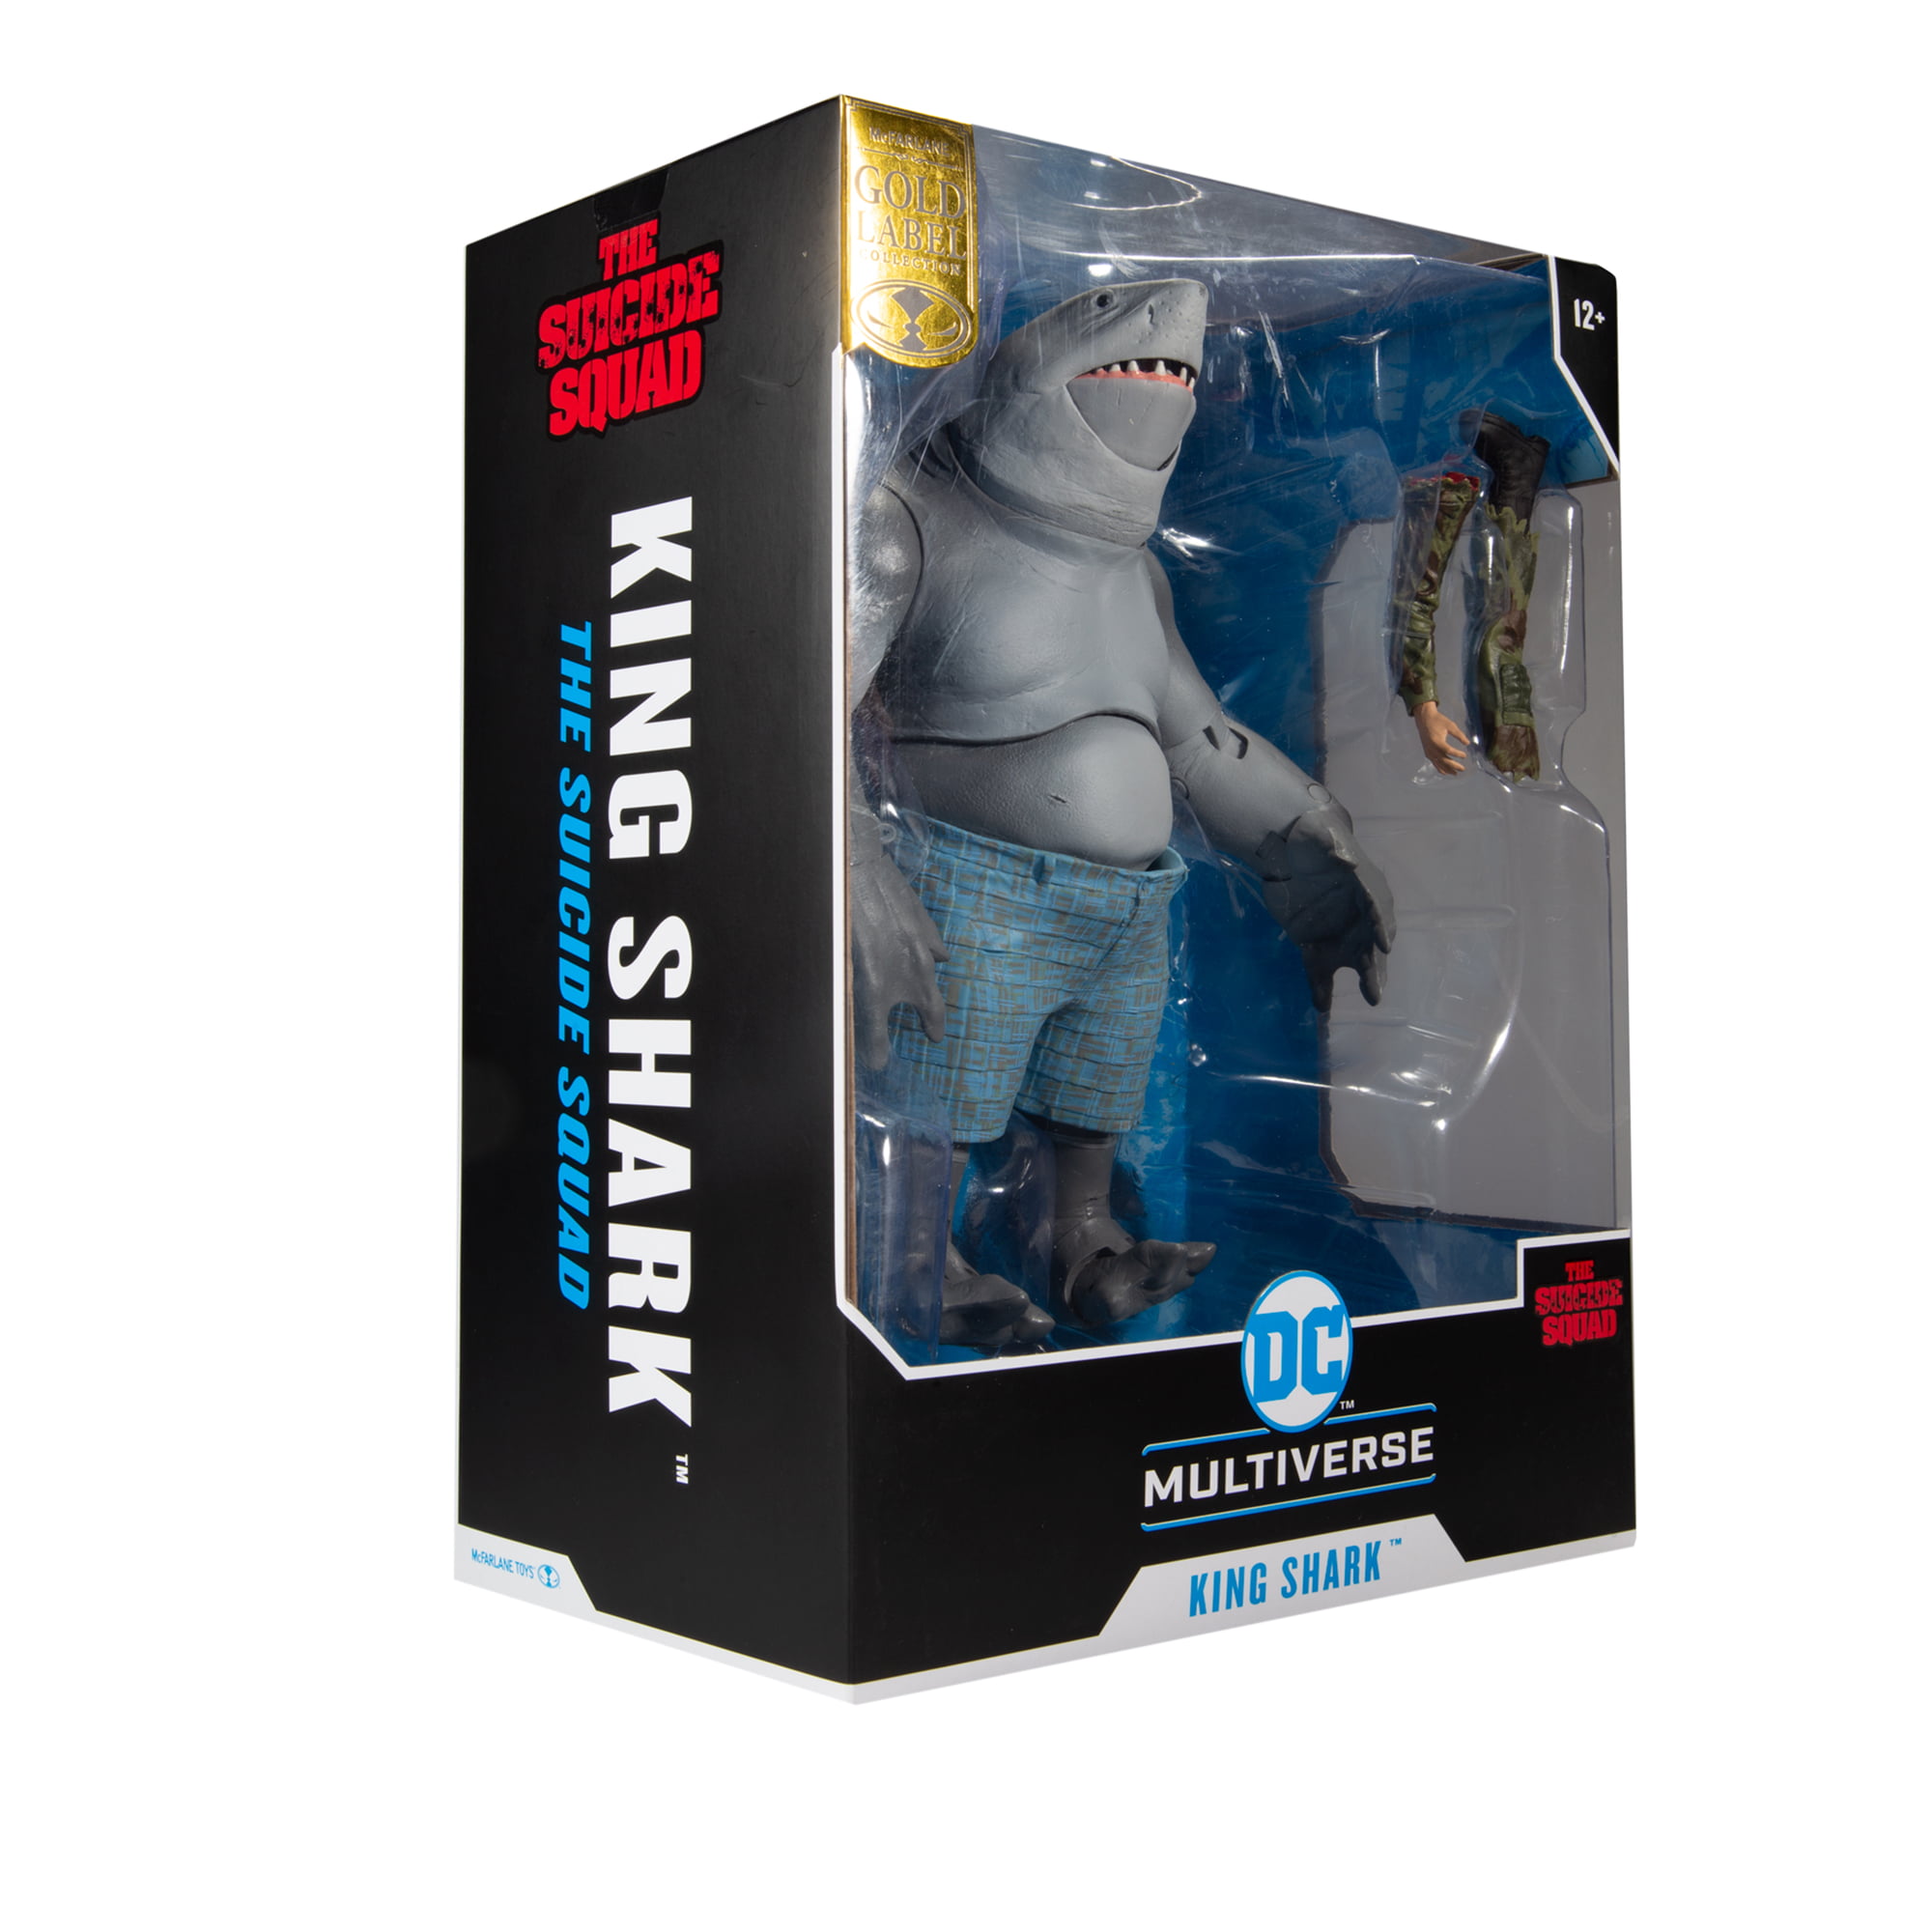 14" US Toy Toy Shark Action Figure 